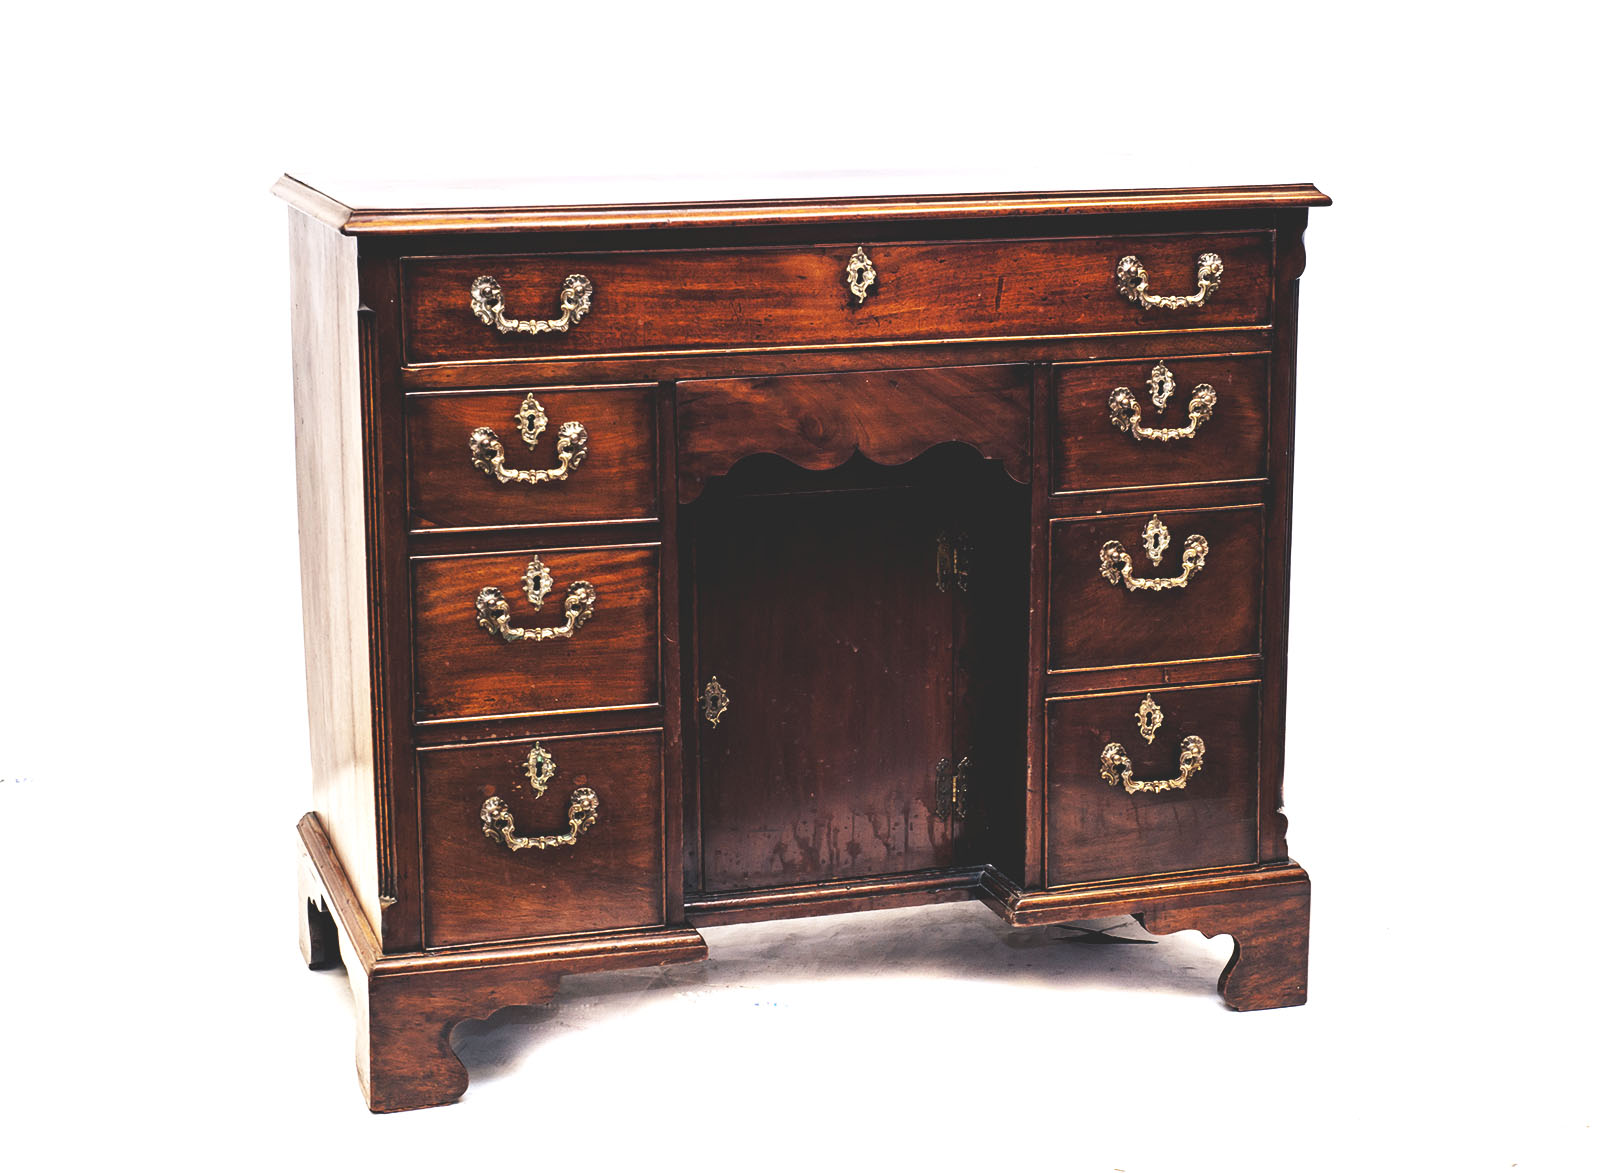 IM Chaney - A dark wood chest of drawers with gold handles